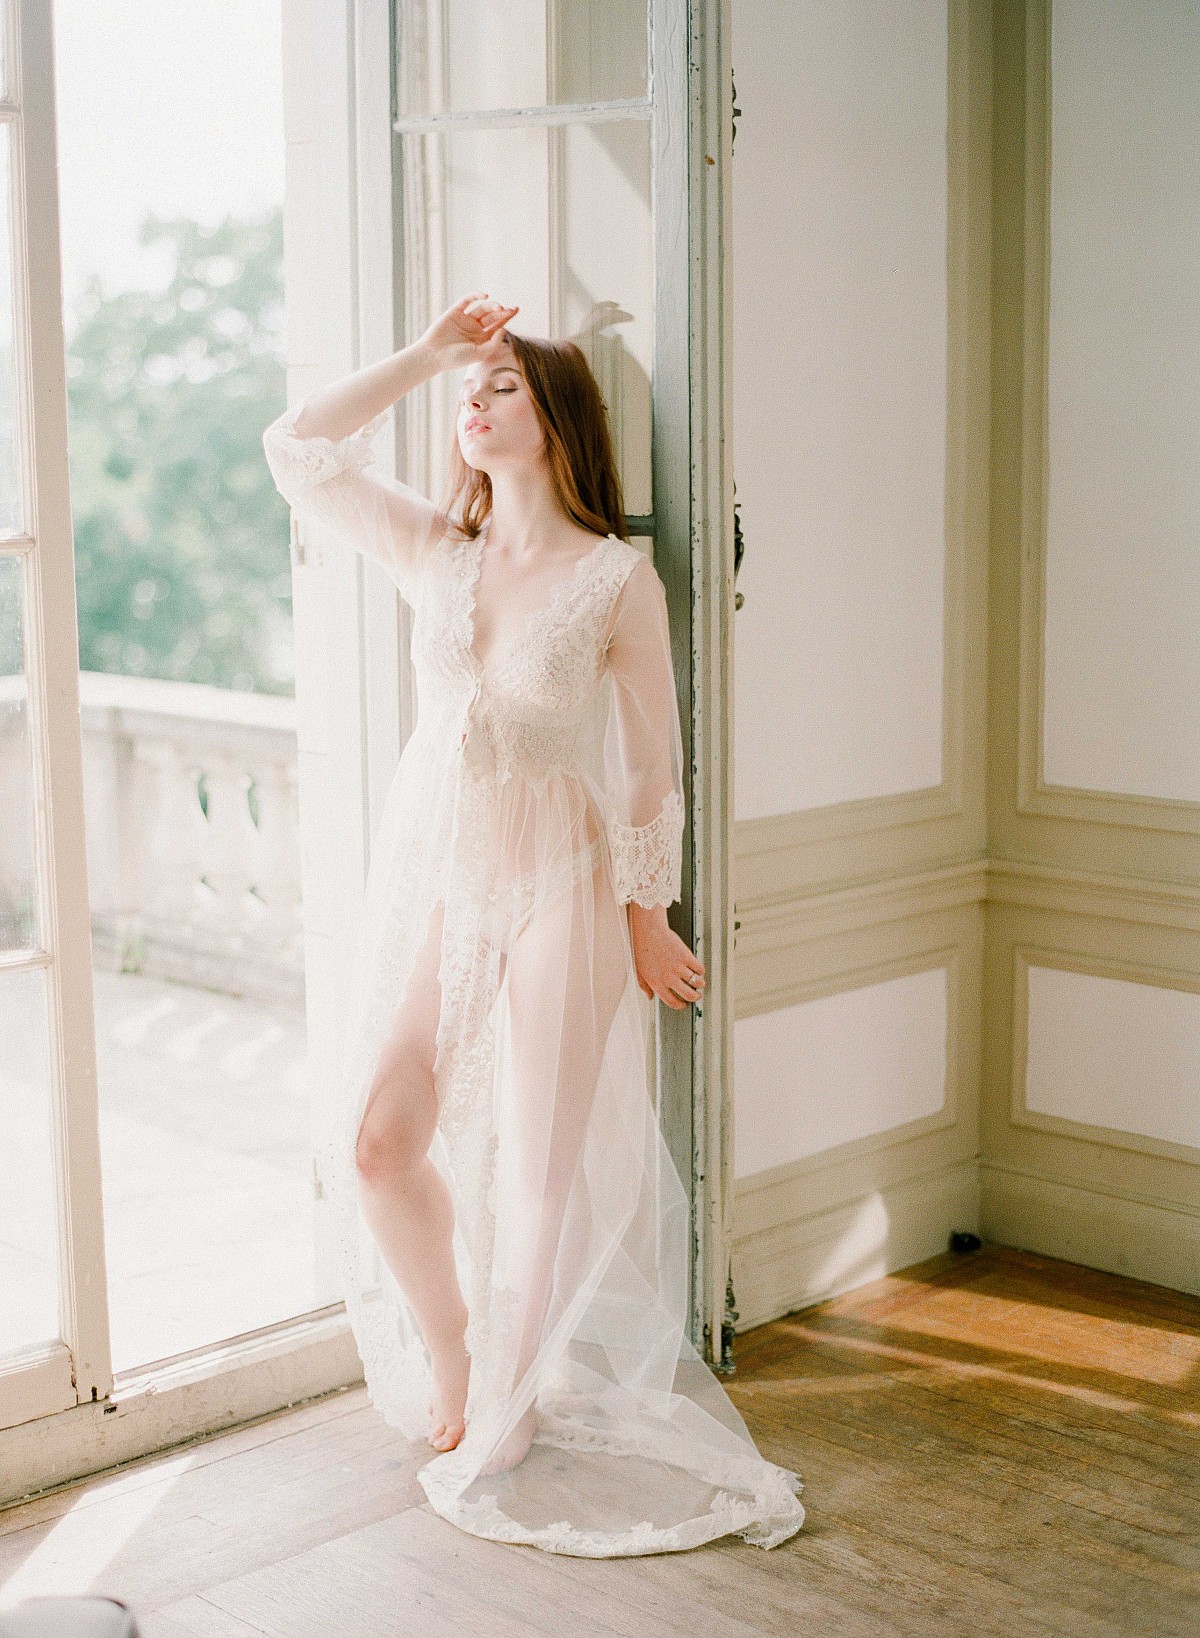 Ethereal Boudoir, Engagement, and Bridals from Gather and Grow Workshop